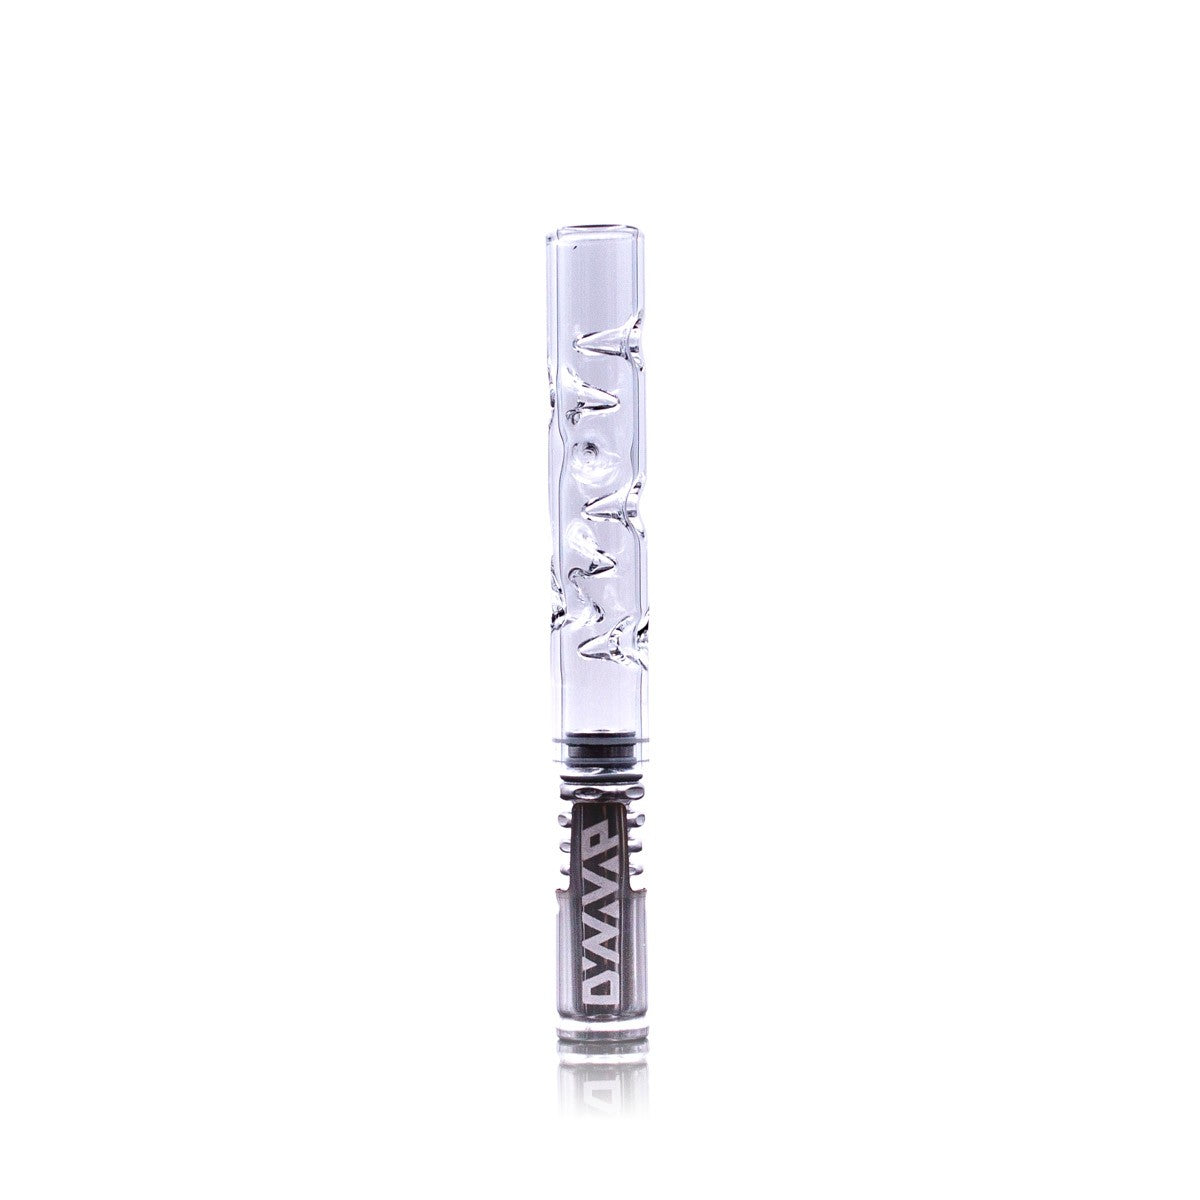 The Stash Shack Glass Cooling Stem for DynaVap, clear design, front view on white background